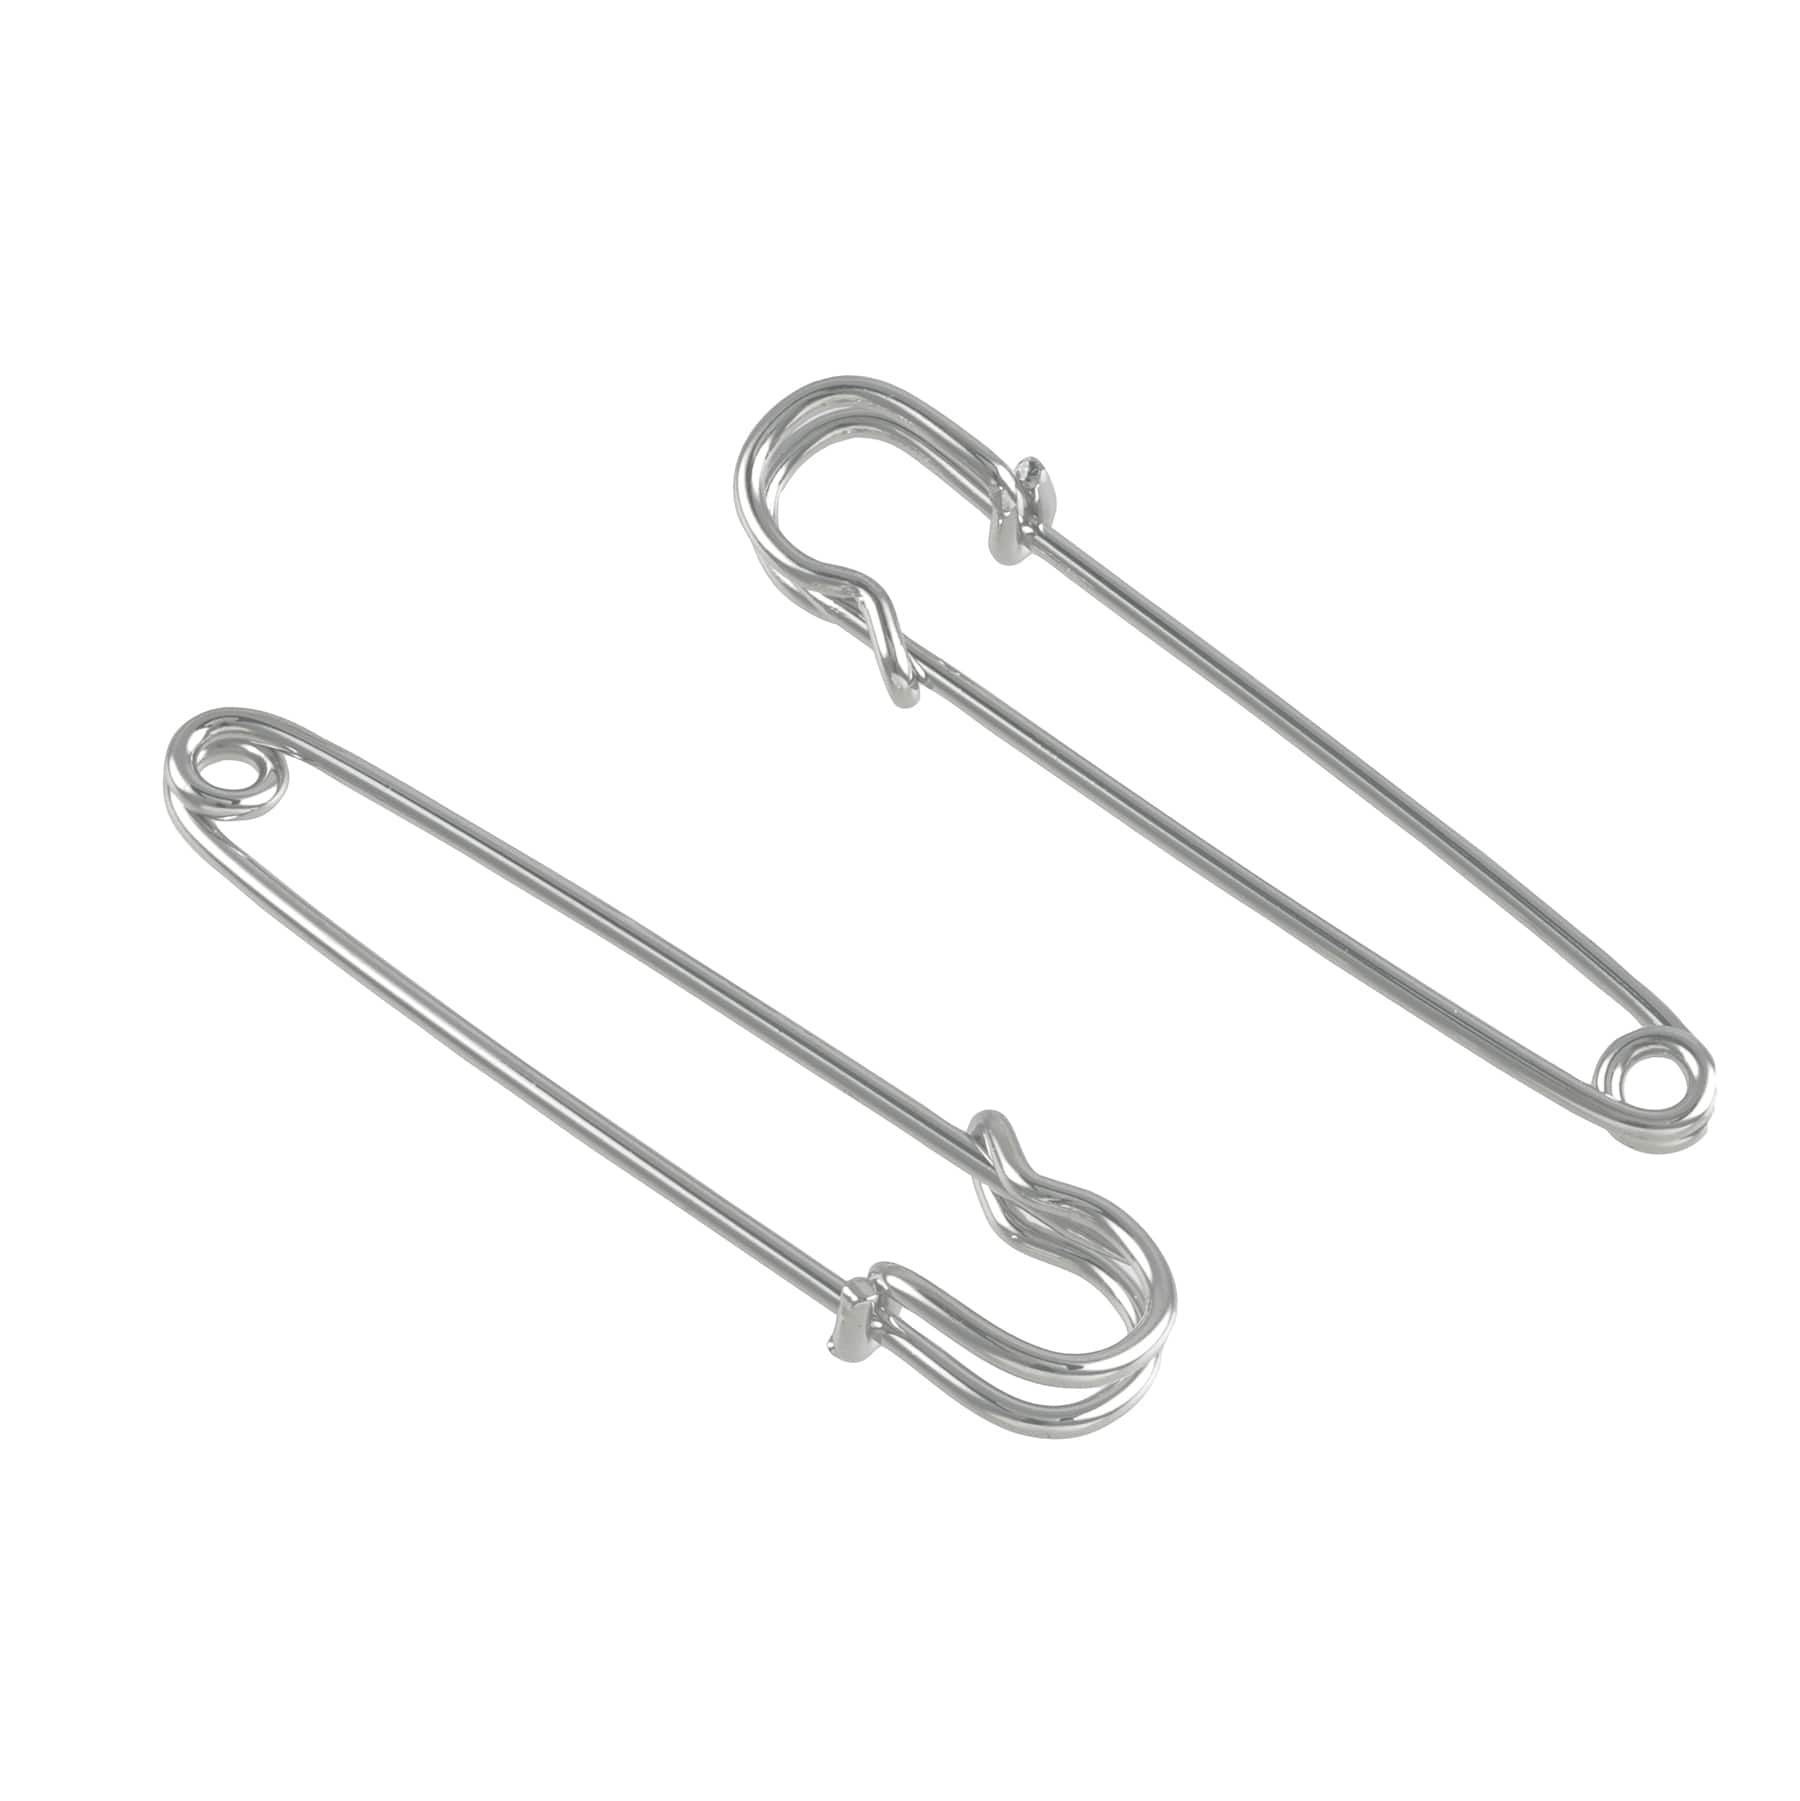 Decorative Safety Pins · A Safety Pin Brooch · Jewelry Making on Cut Out +  Keep